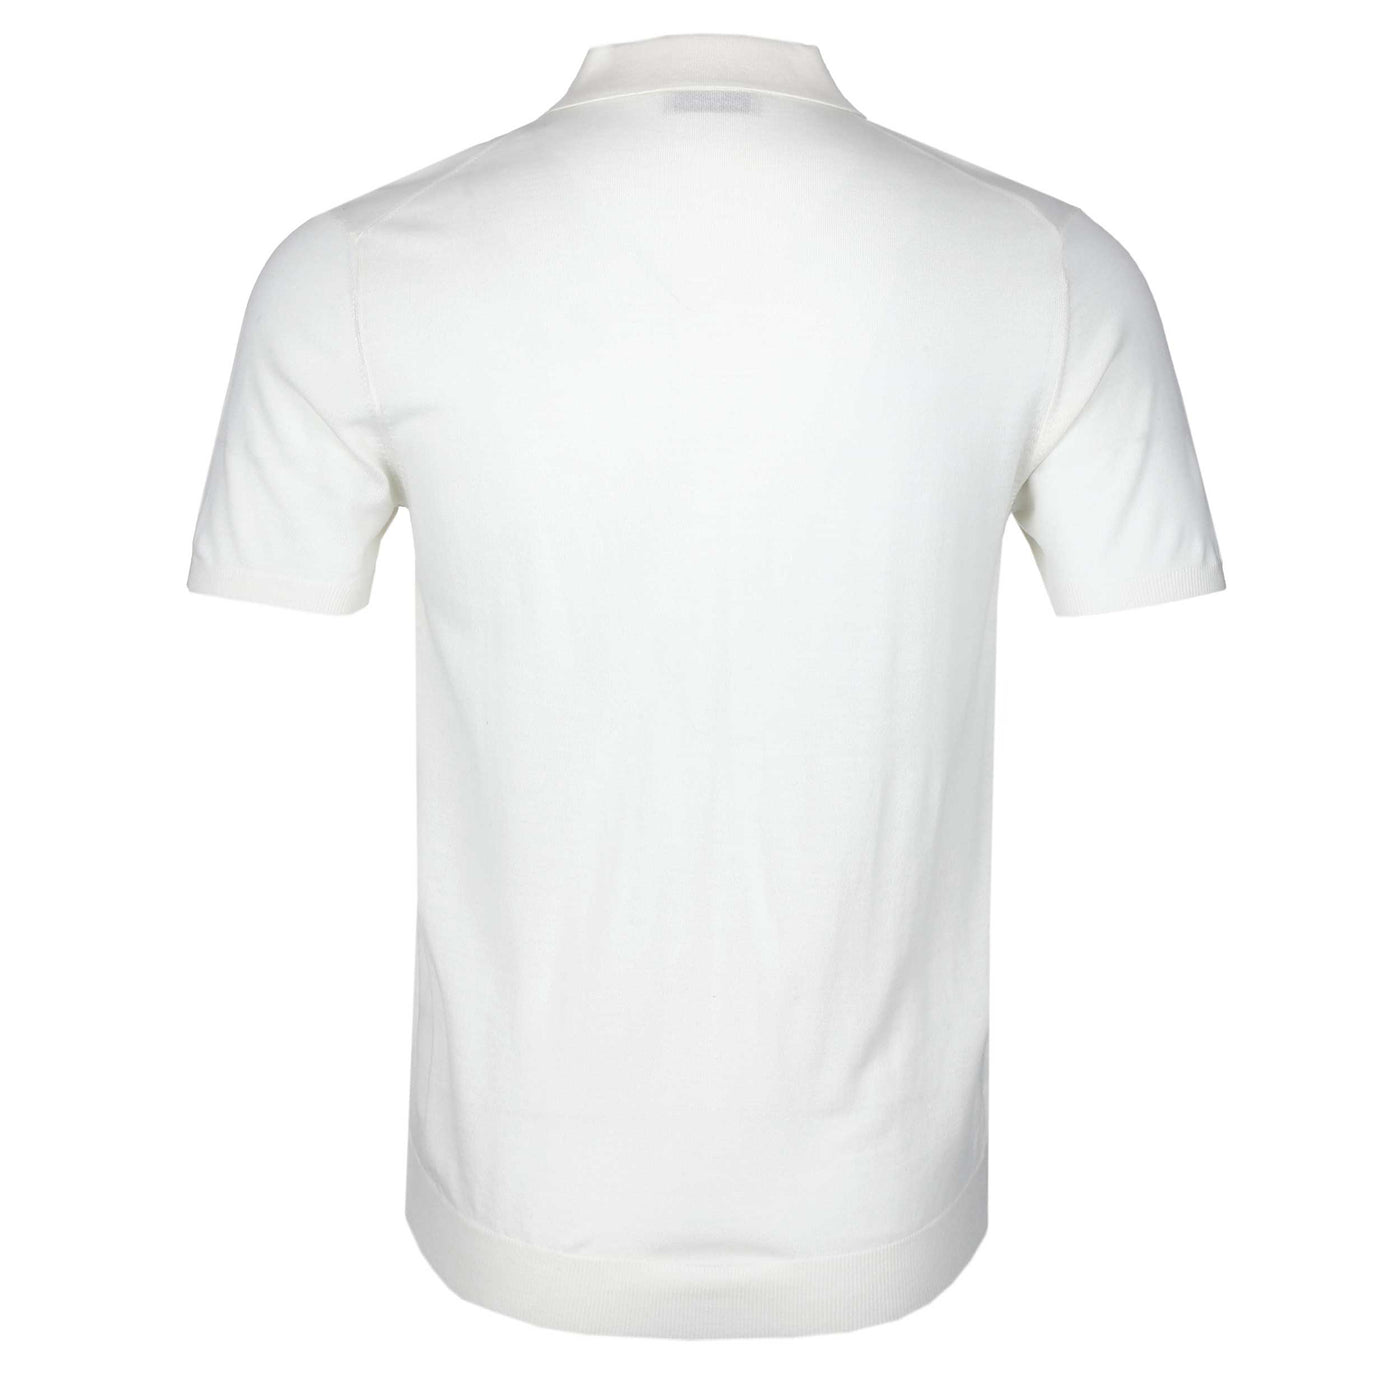 Thomas Maine Knitted Basic Polo Shirt in Off White Back